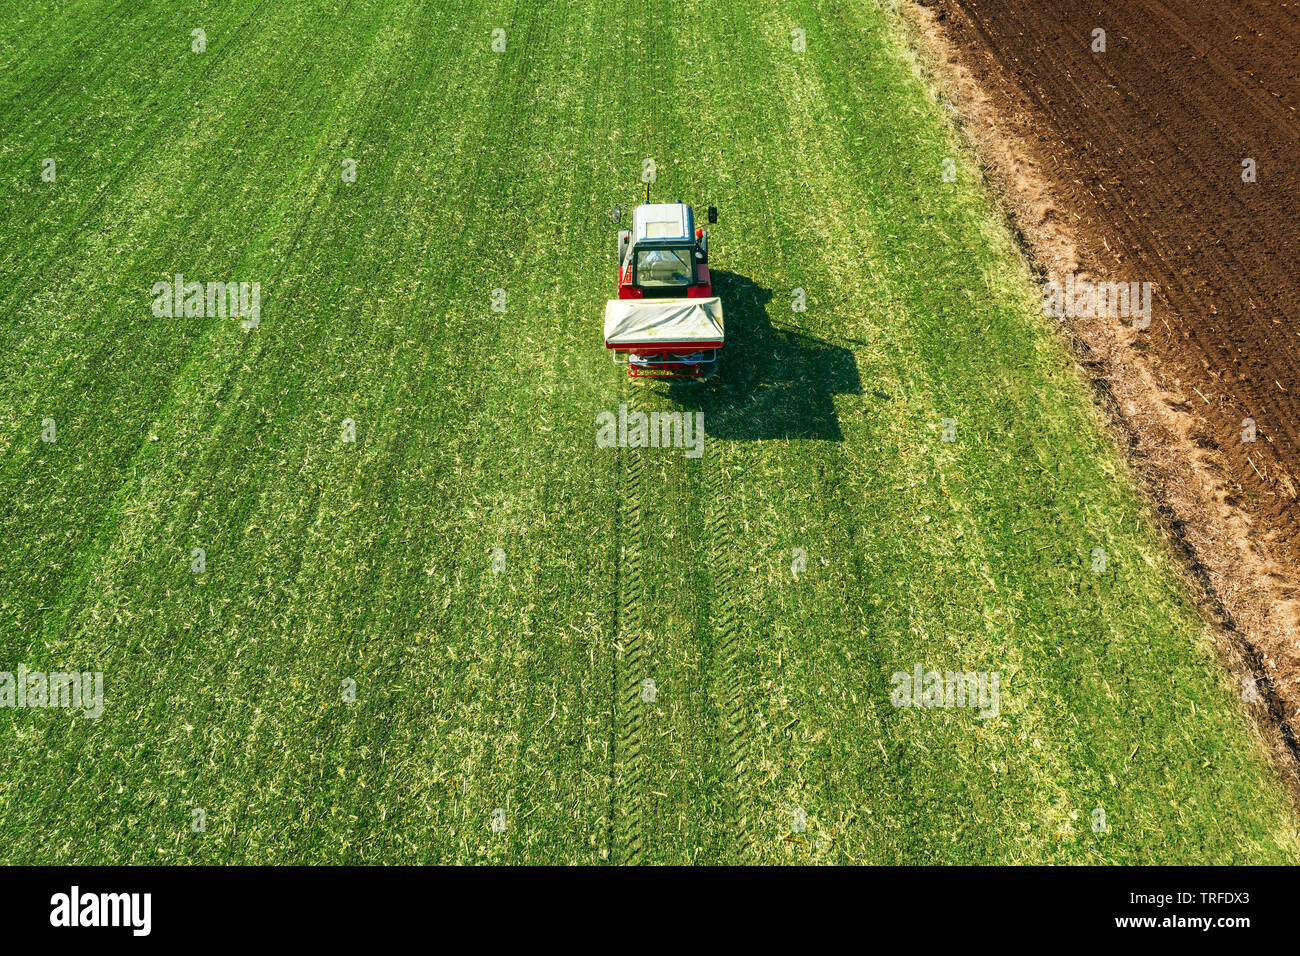 Unrecognizable farmer in agricultural tractor is fertilizing wheat crop field with NPK fertilizers, aerial view from drone pov Stock Photo